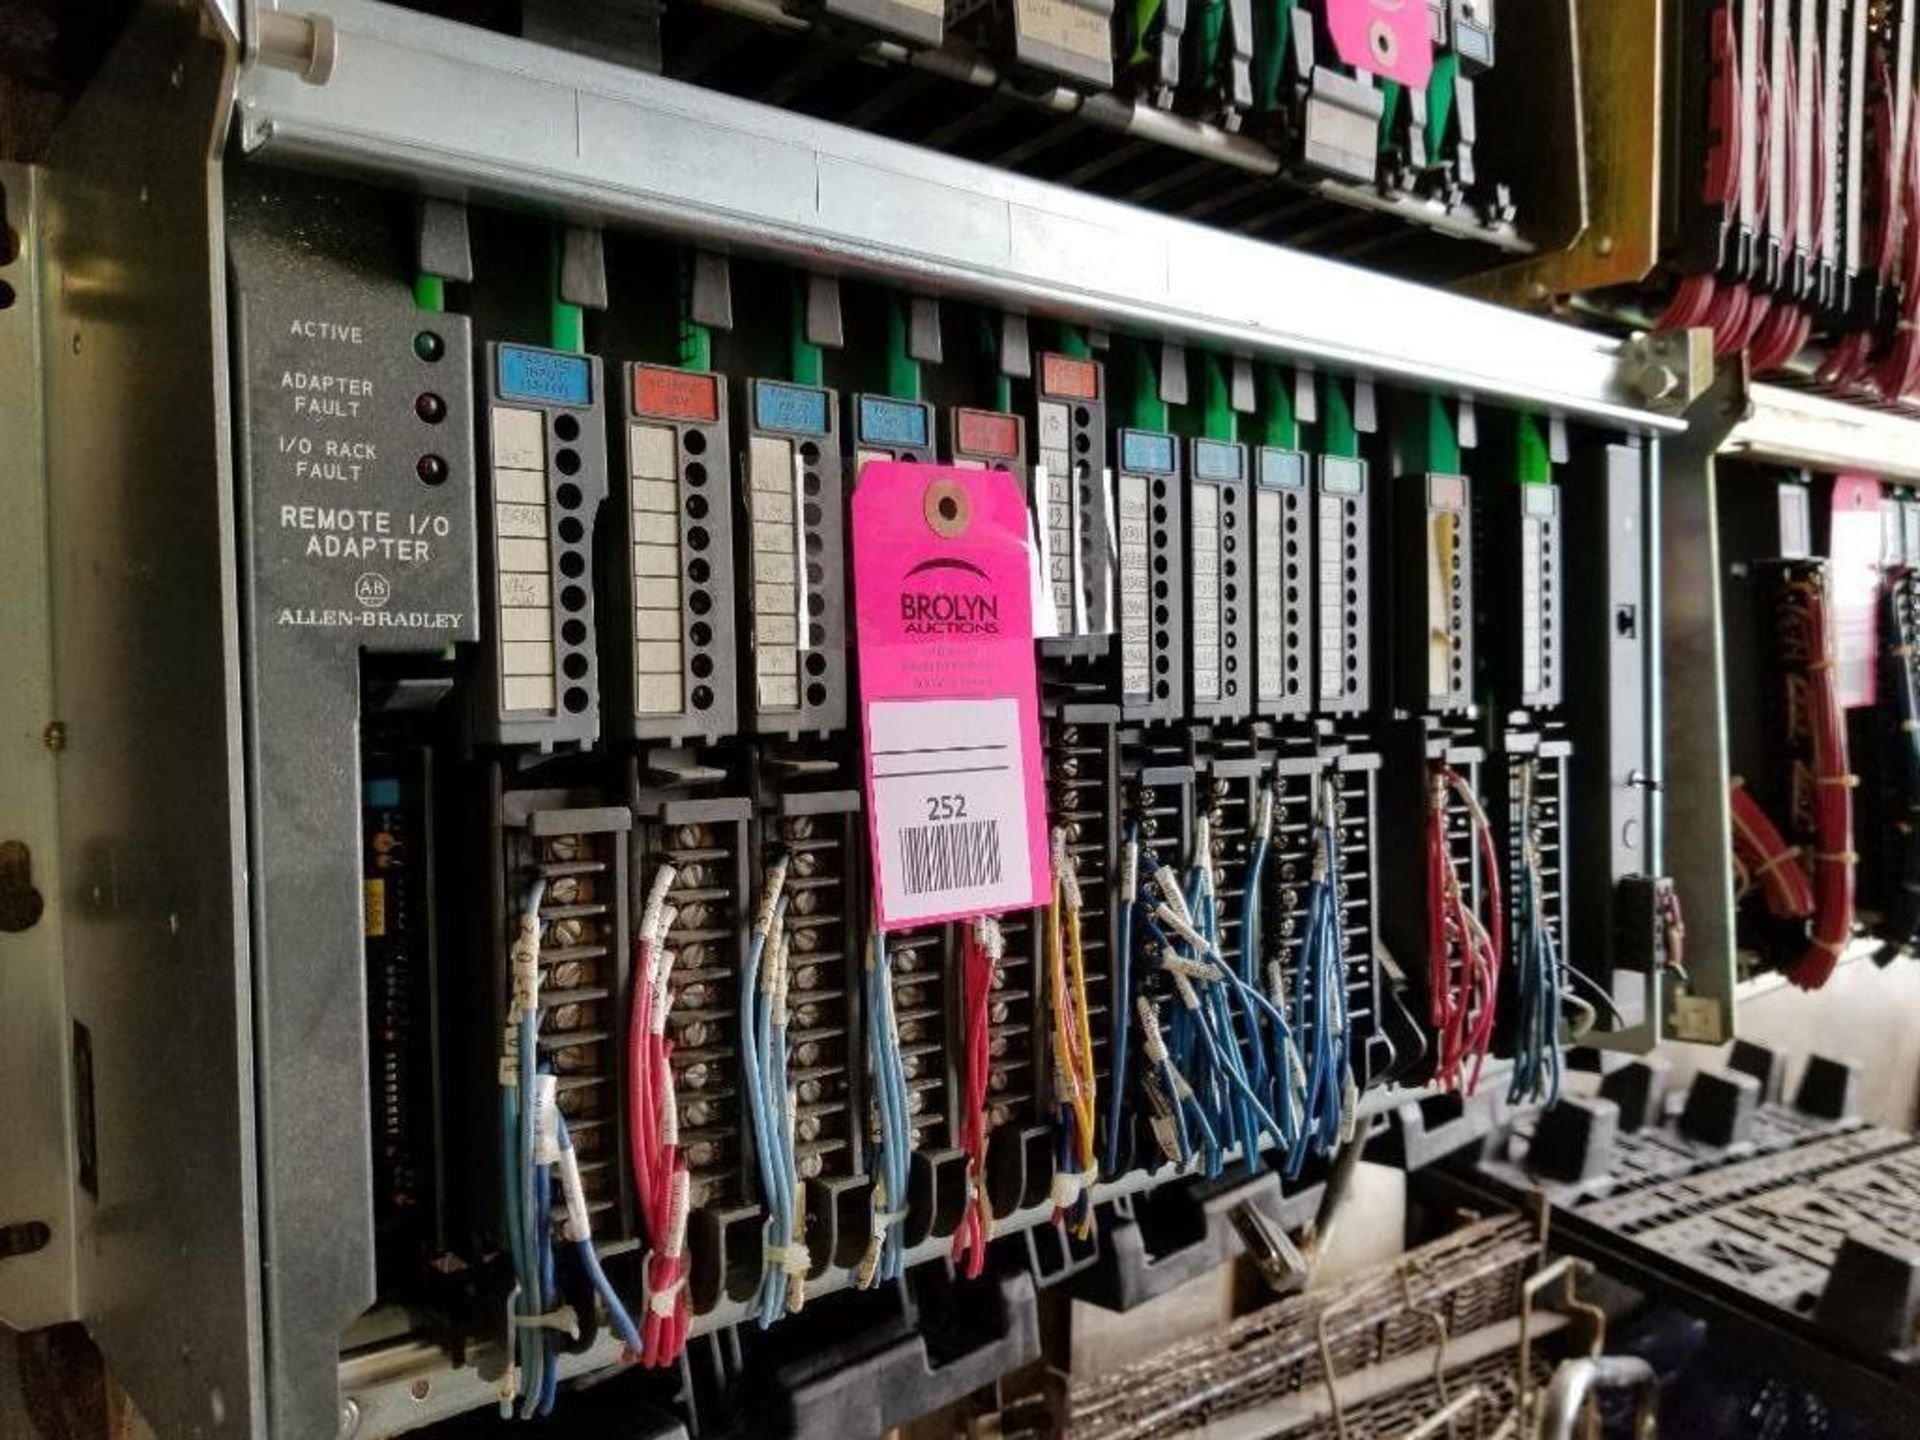 Allen Bradley PLC rack as pictured. - Image 2 of 5